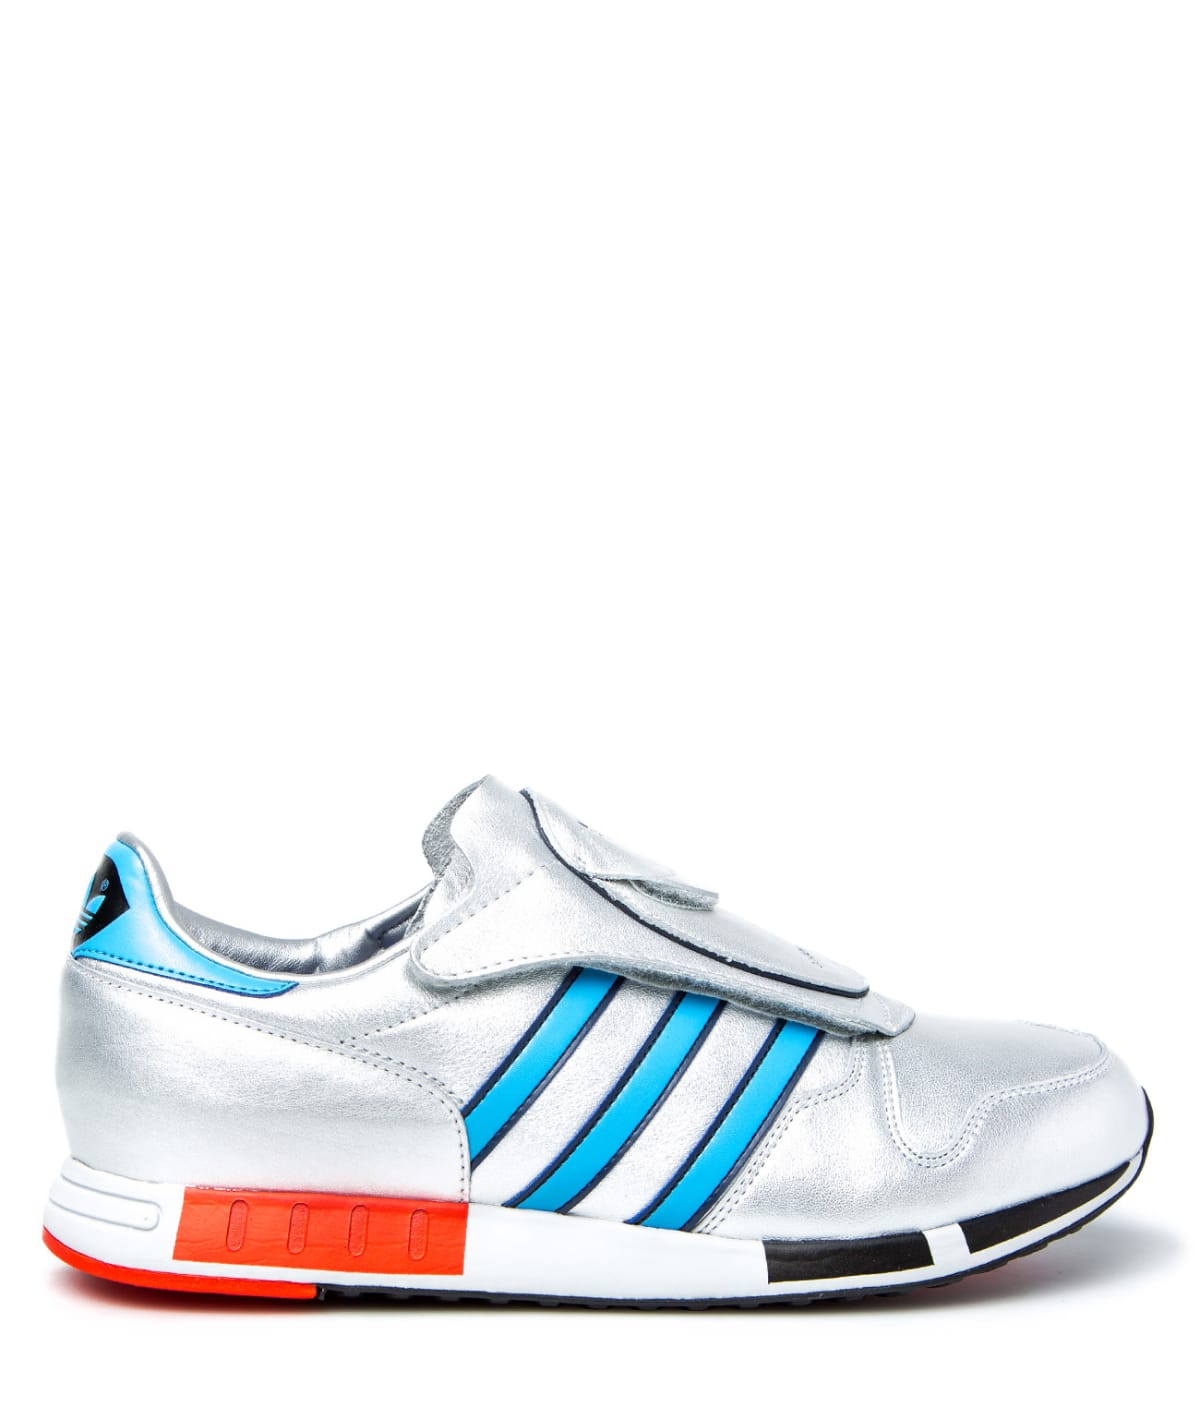 adidas micropacer shop online